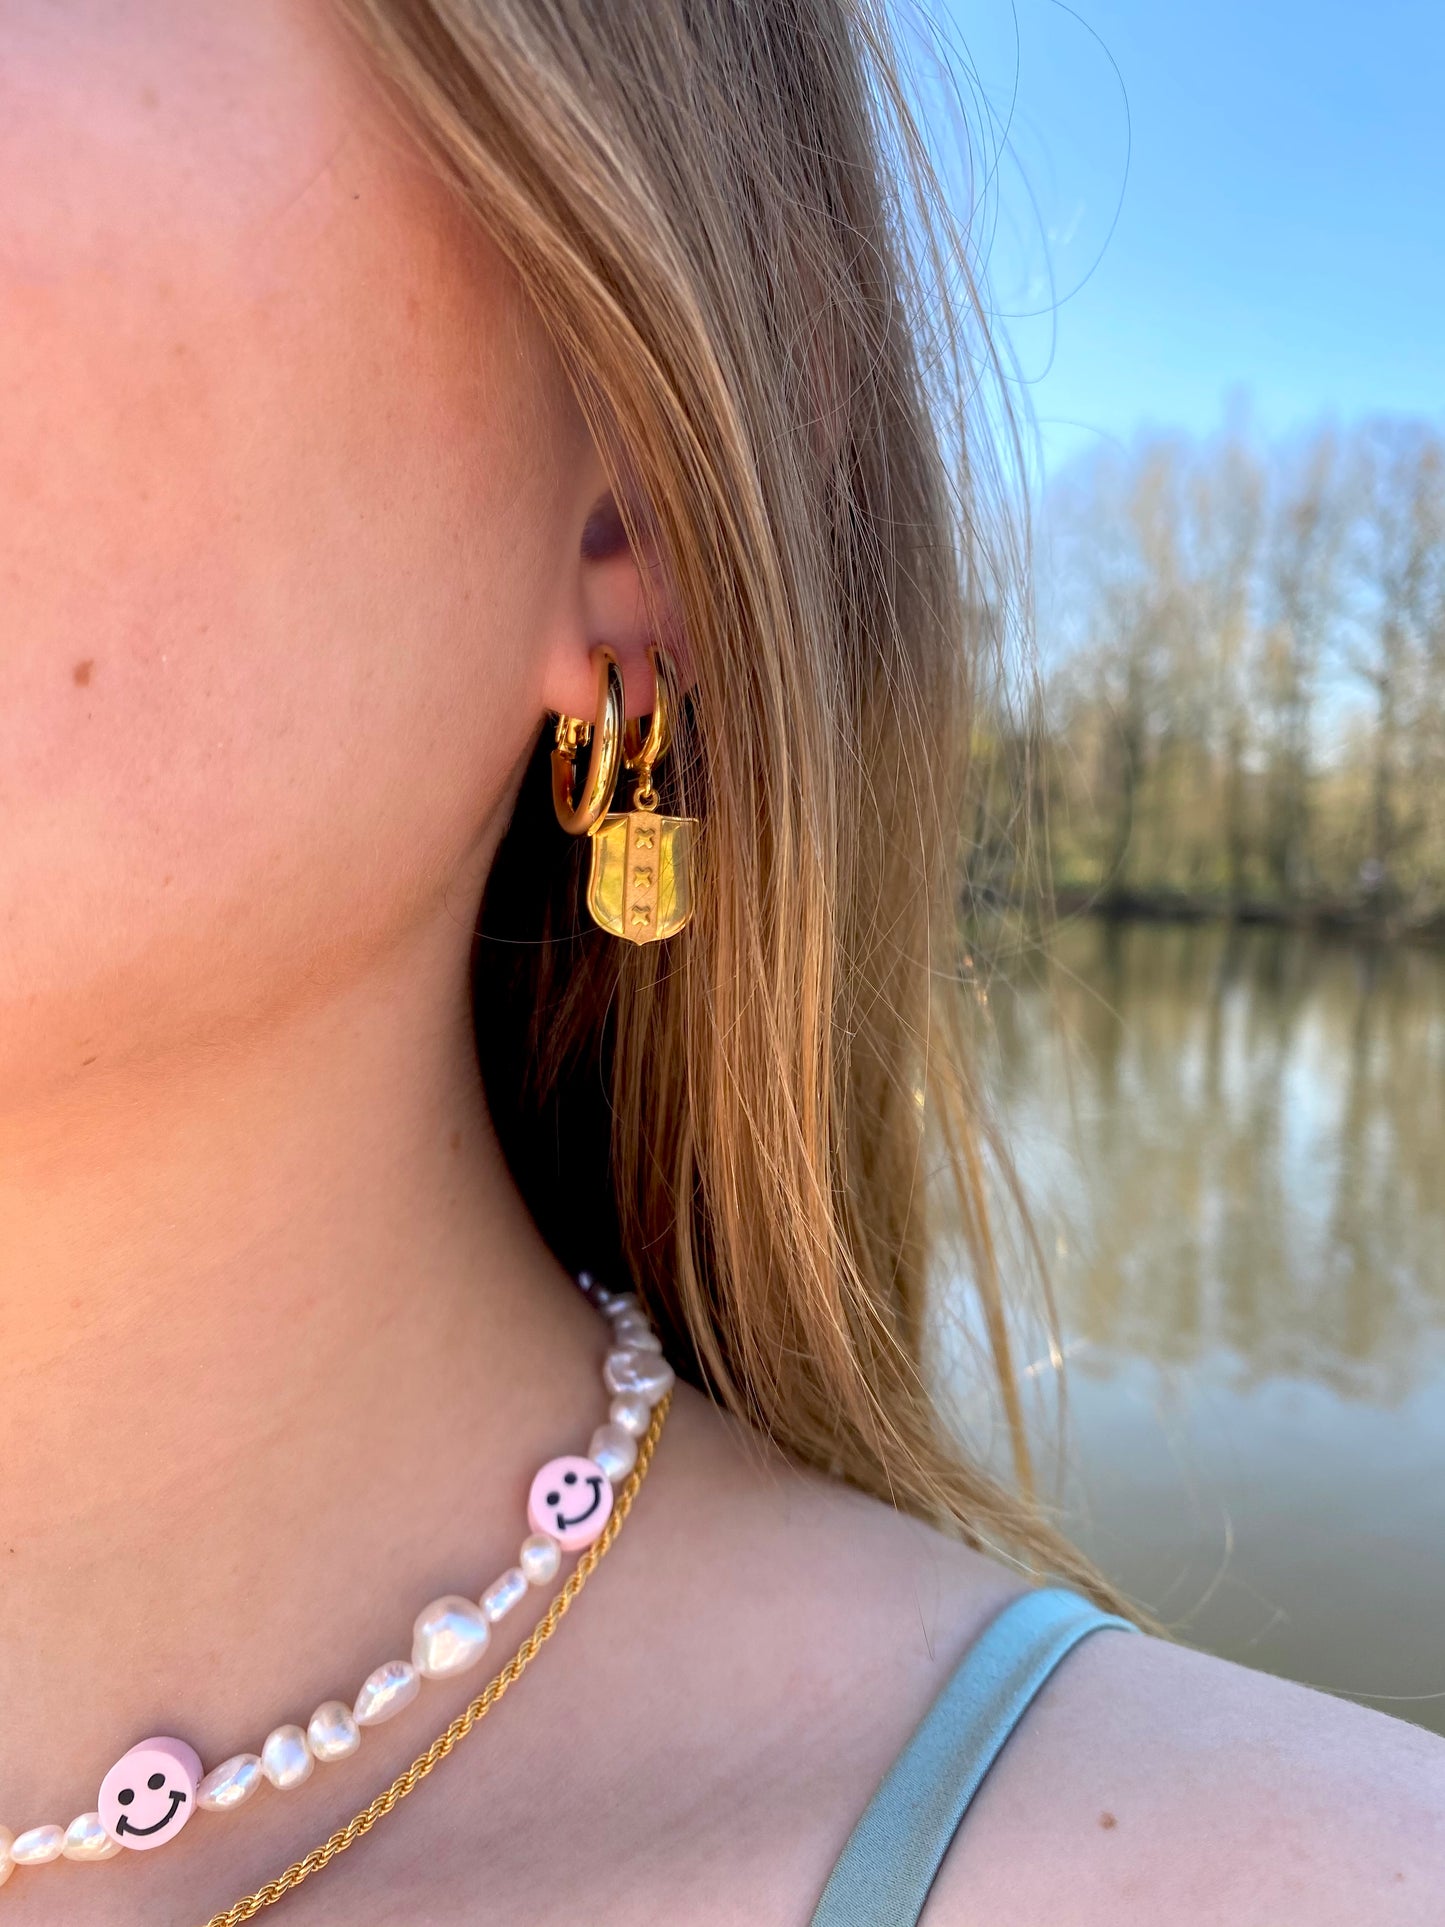 Limited edition Amsterdam earring